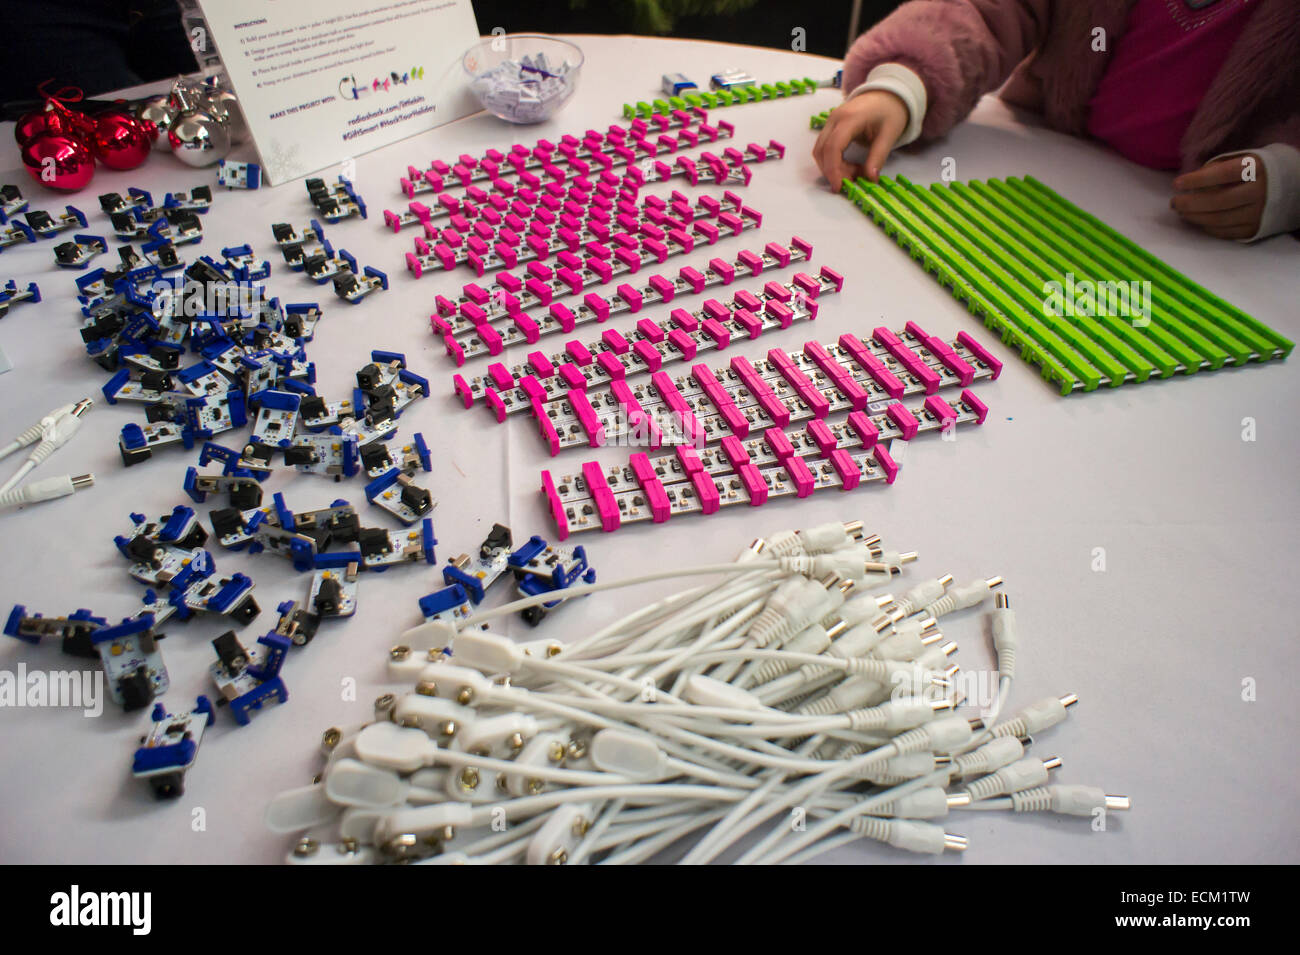 RadioShack sponsors a demonstration of LittleBits technology at an event in New York on Saturday, December 13, 2014. The retailer joined with LittleBits to promote the company's DIY kits which enable you to automate your household gadgets to connect to the 'Internet of Things' (IoT). Various modules connect together to turn your analog appliances into cloud connected smart appliances. RadioShack sells the devices hoping to reinvigorate itself as the go to place for DIY tech geeks. (© Richard B. Levine) Stock Photo